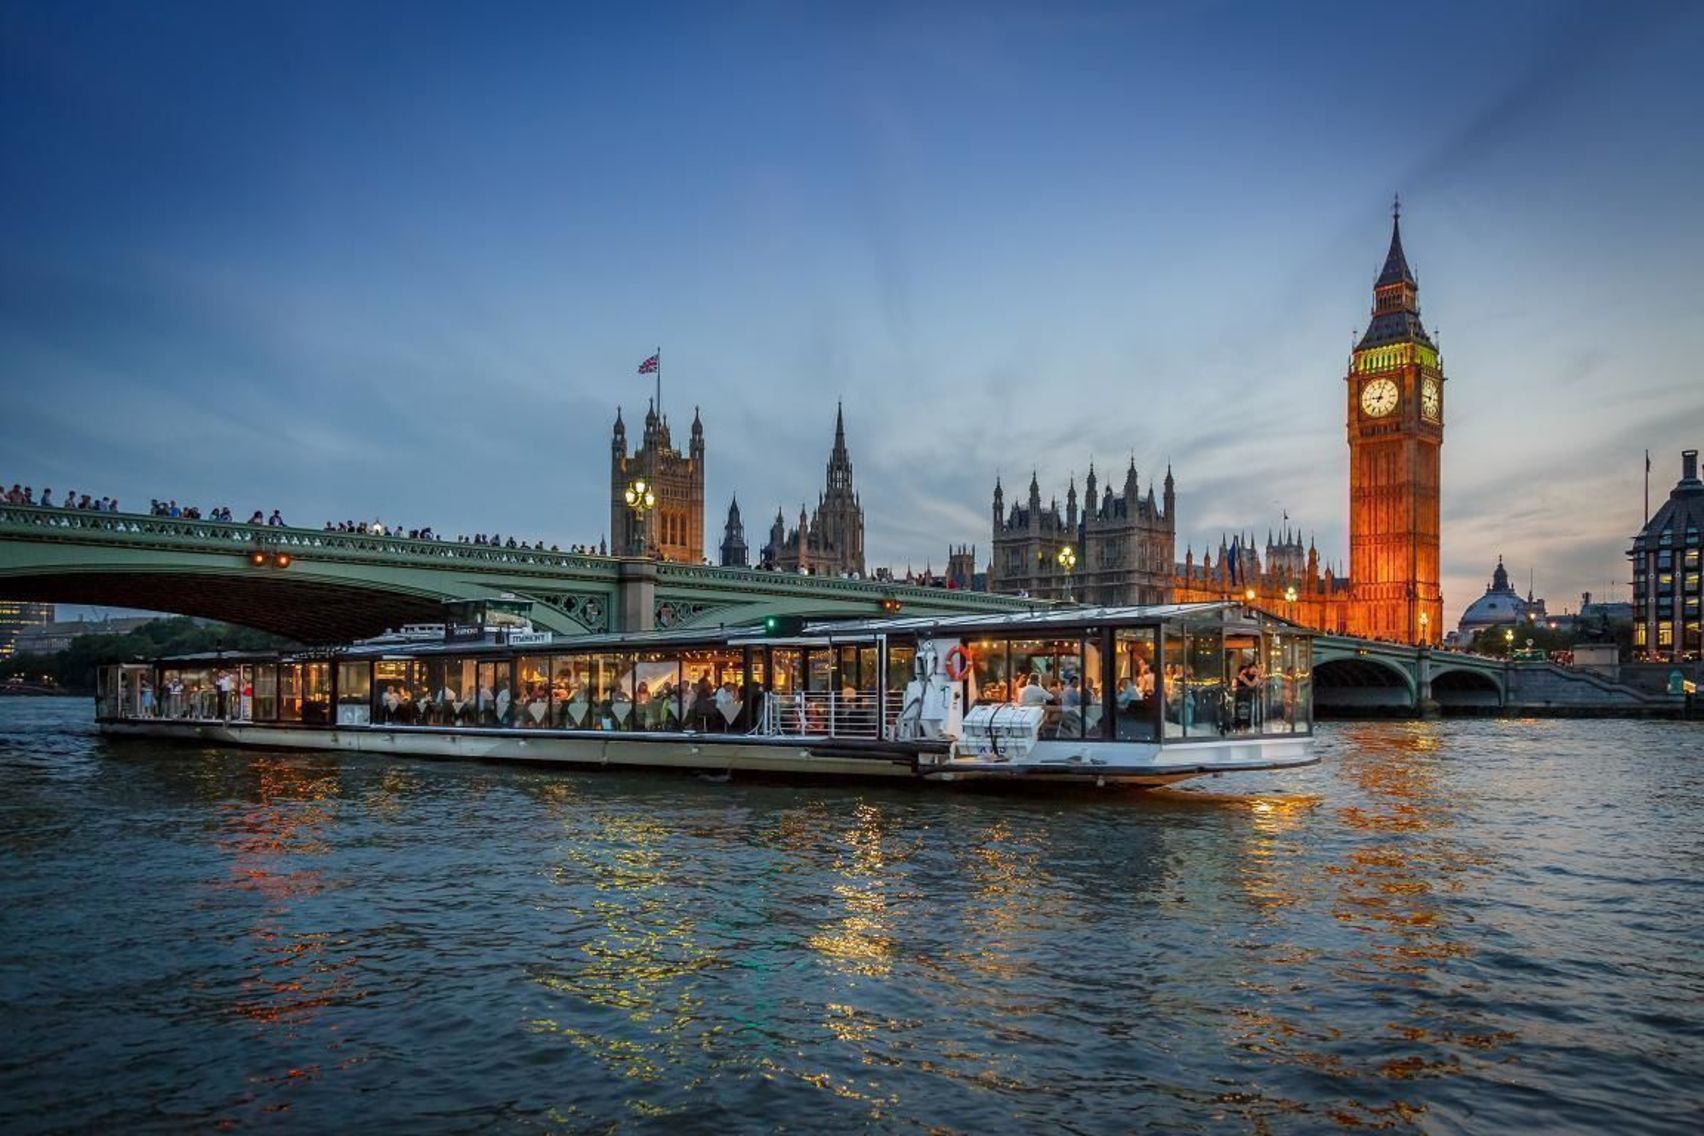 Amazing views from on boatd the Glass Room Christmas Thames dinner cruise